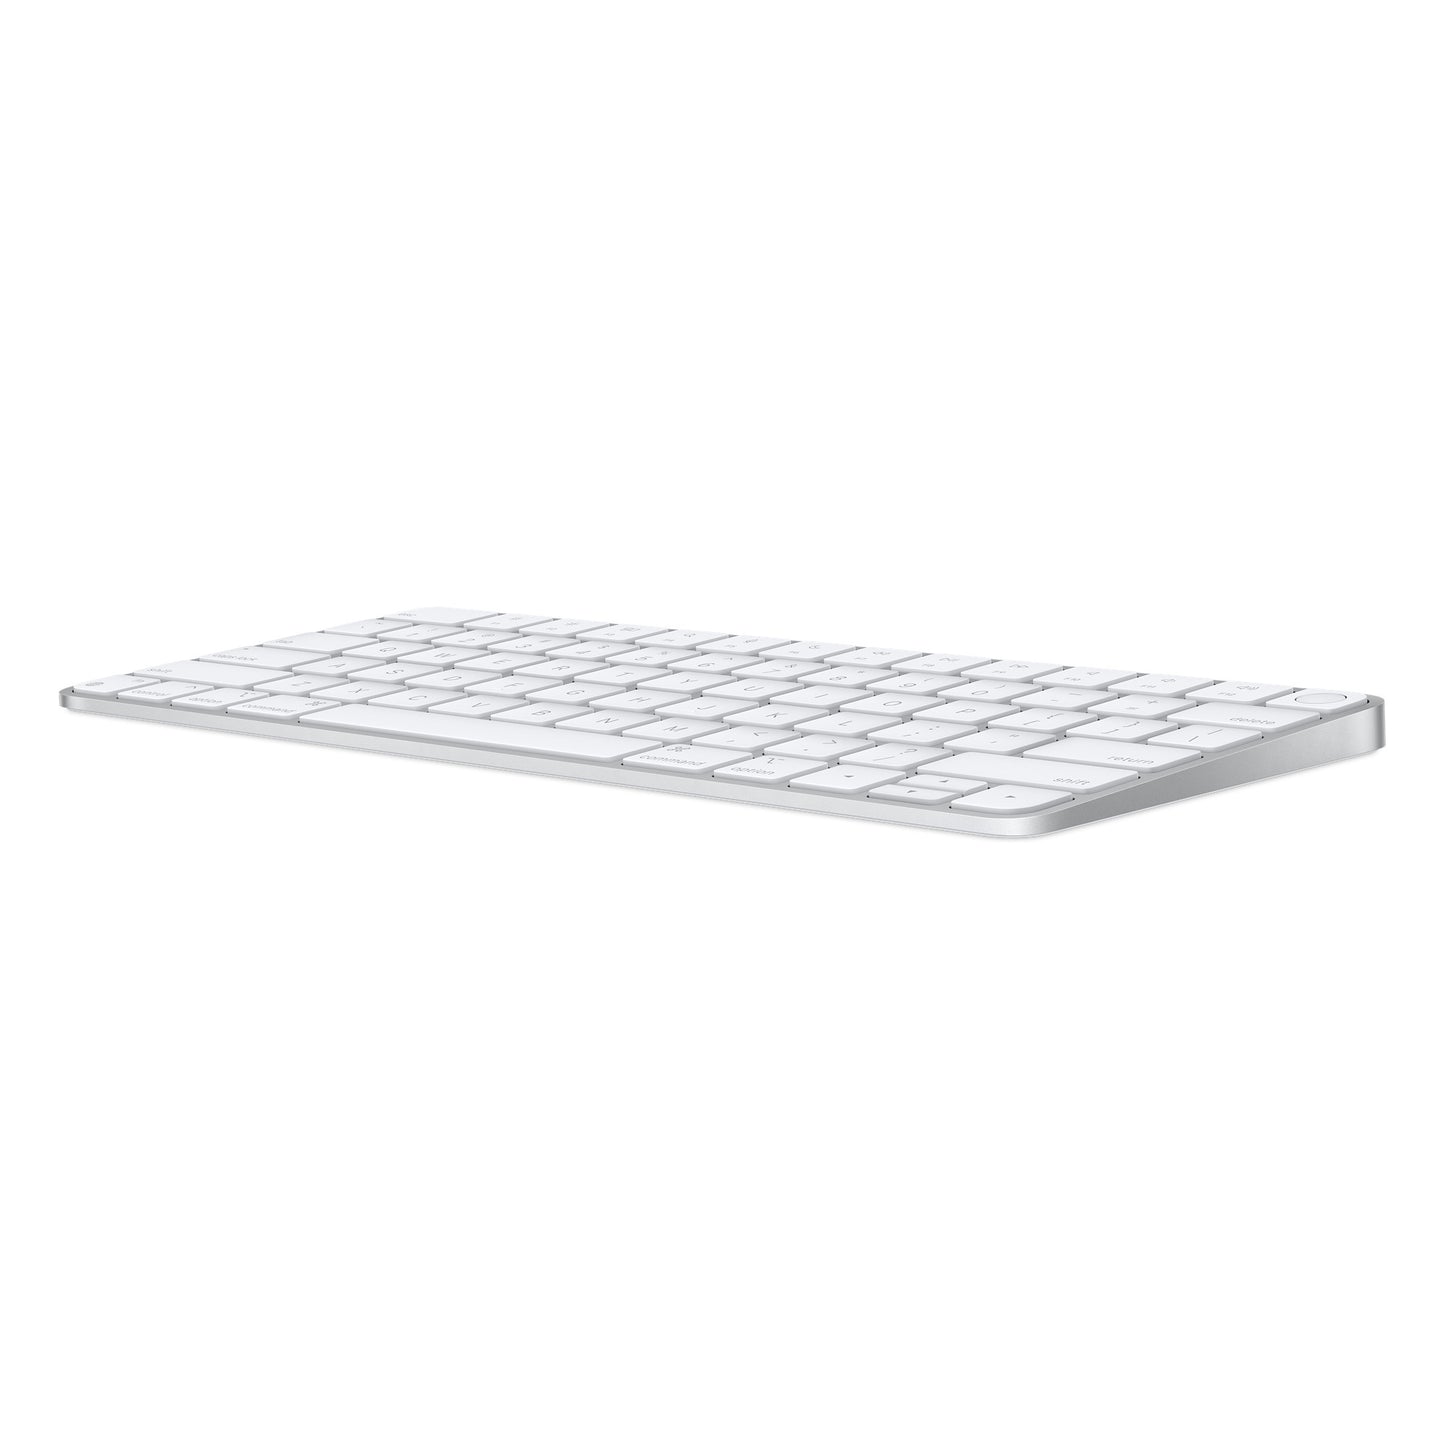 Magic Keyboard with Touch ID for Mac models with Apple silicon - US English